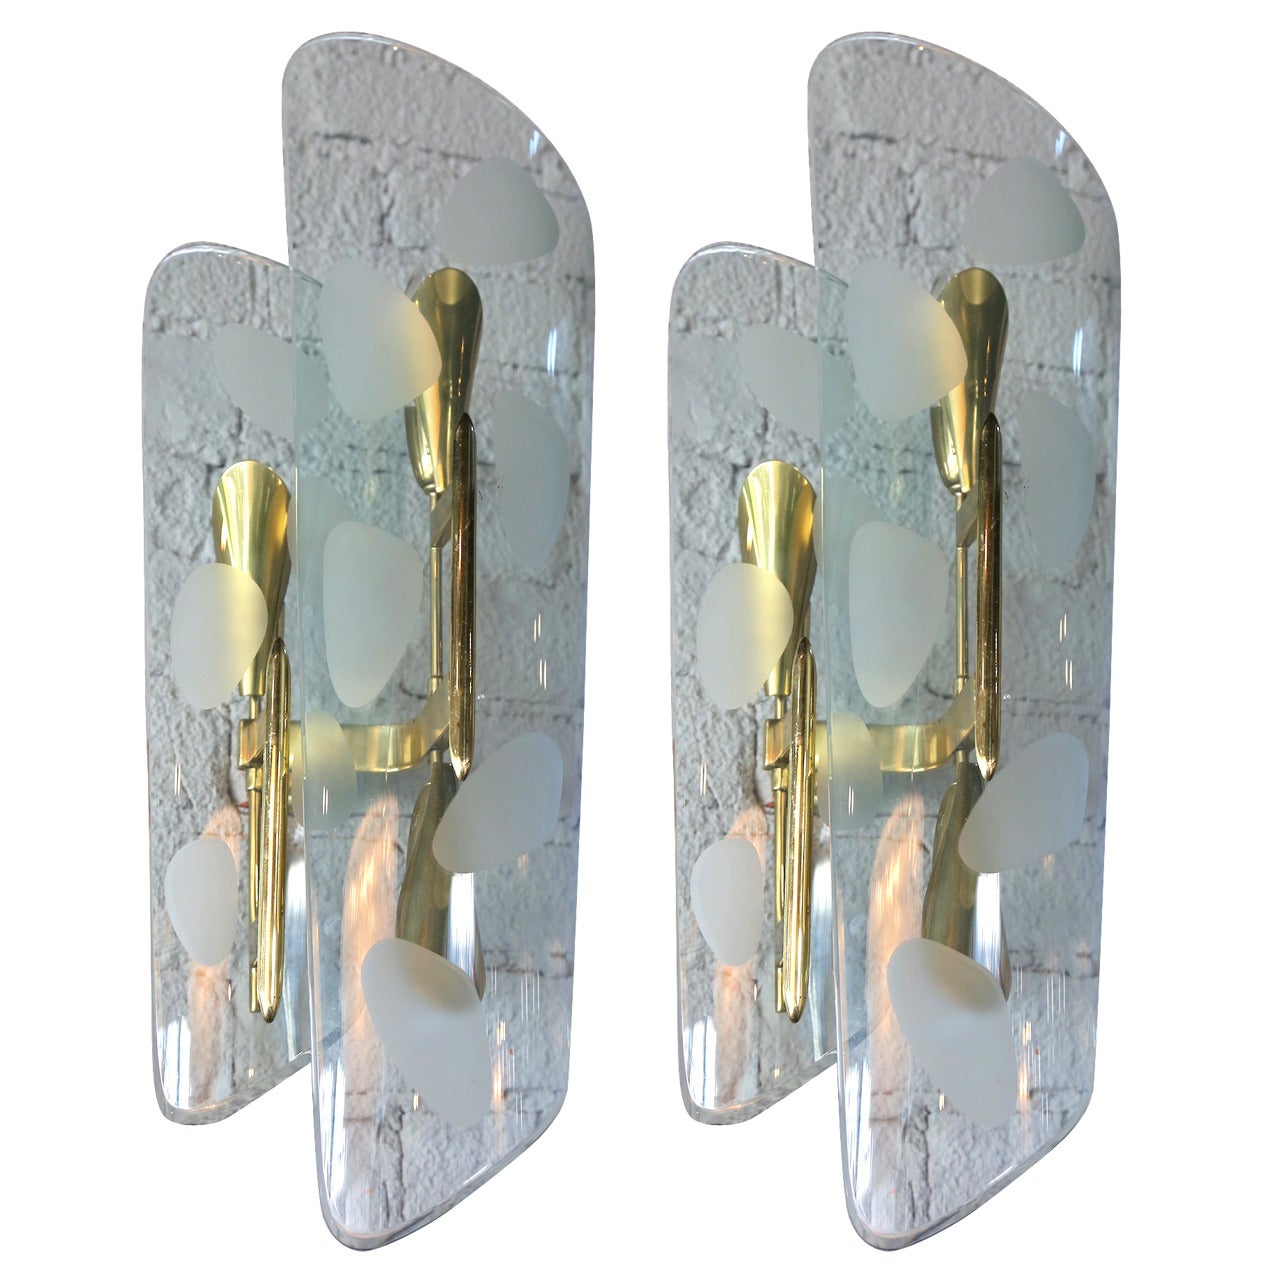 Pair of 1950s Italian sconces with etched glass and brass frames.